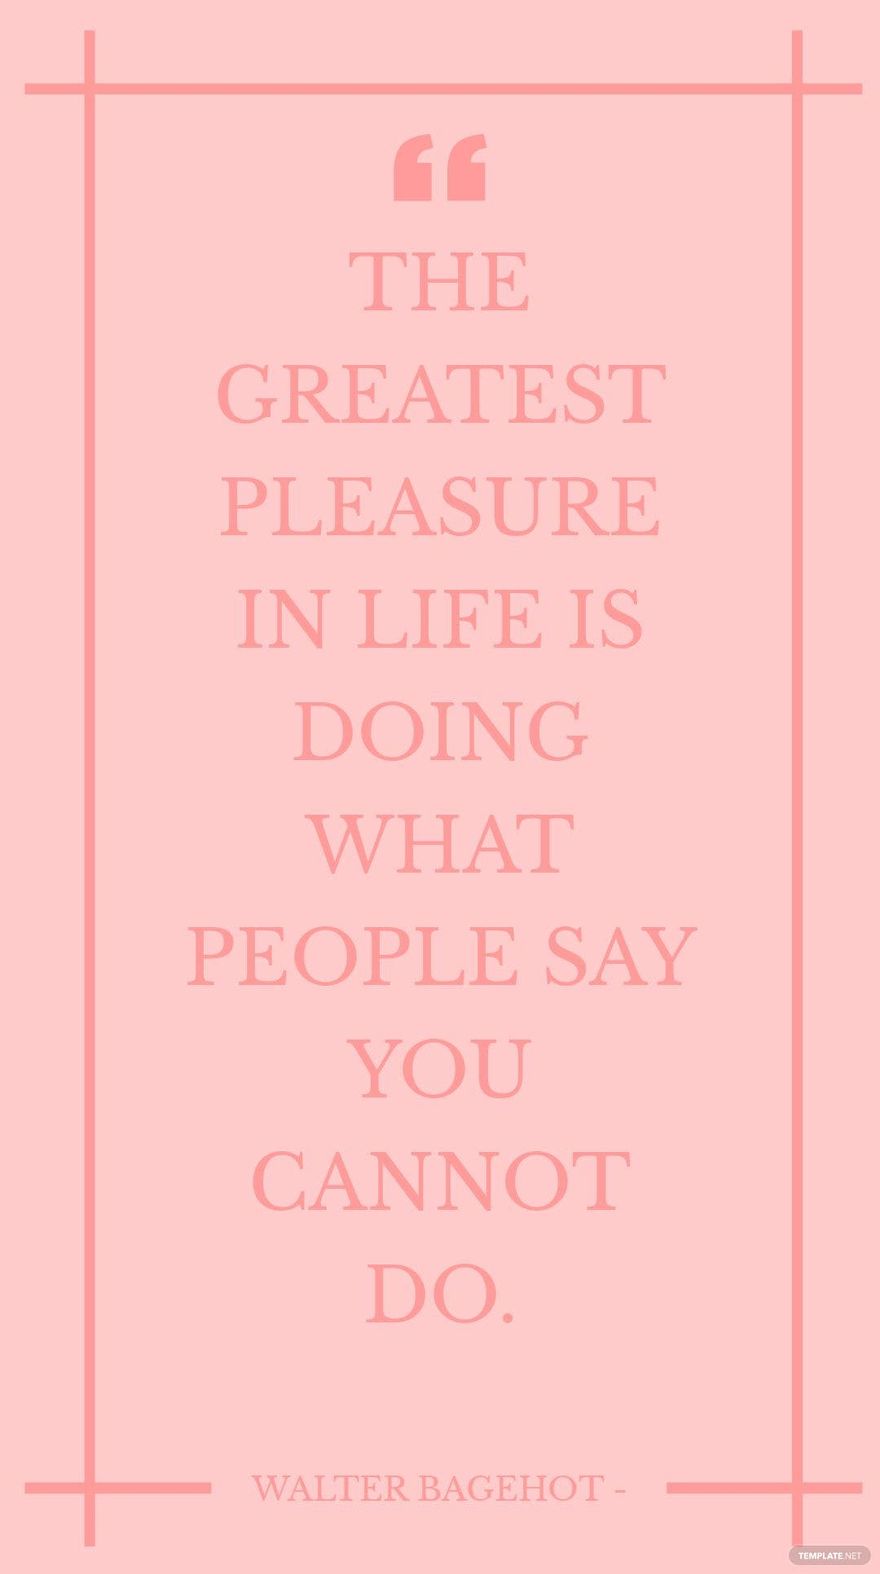 Walter Bagehot - The greatest pleasure in life is doing what people say you cannot do.